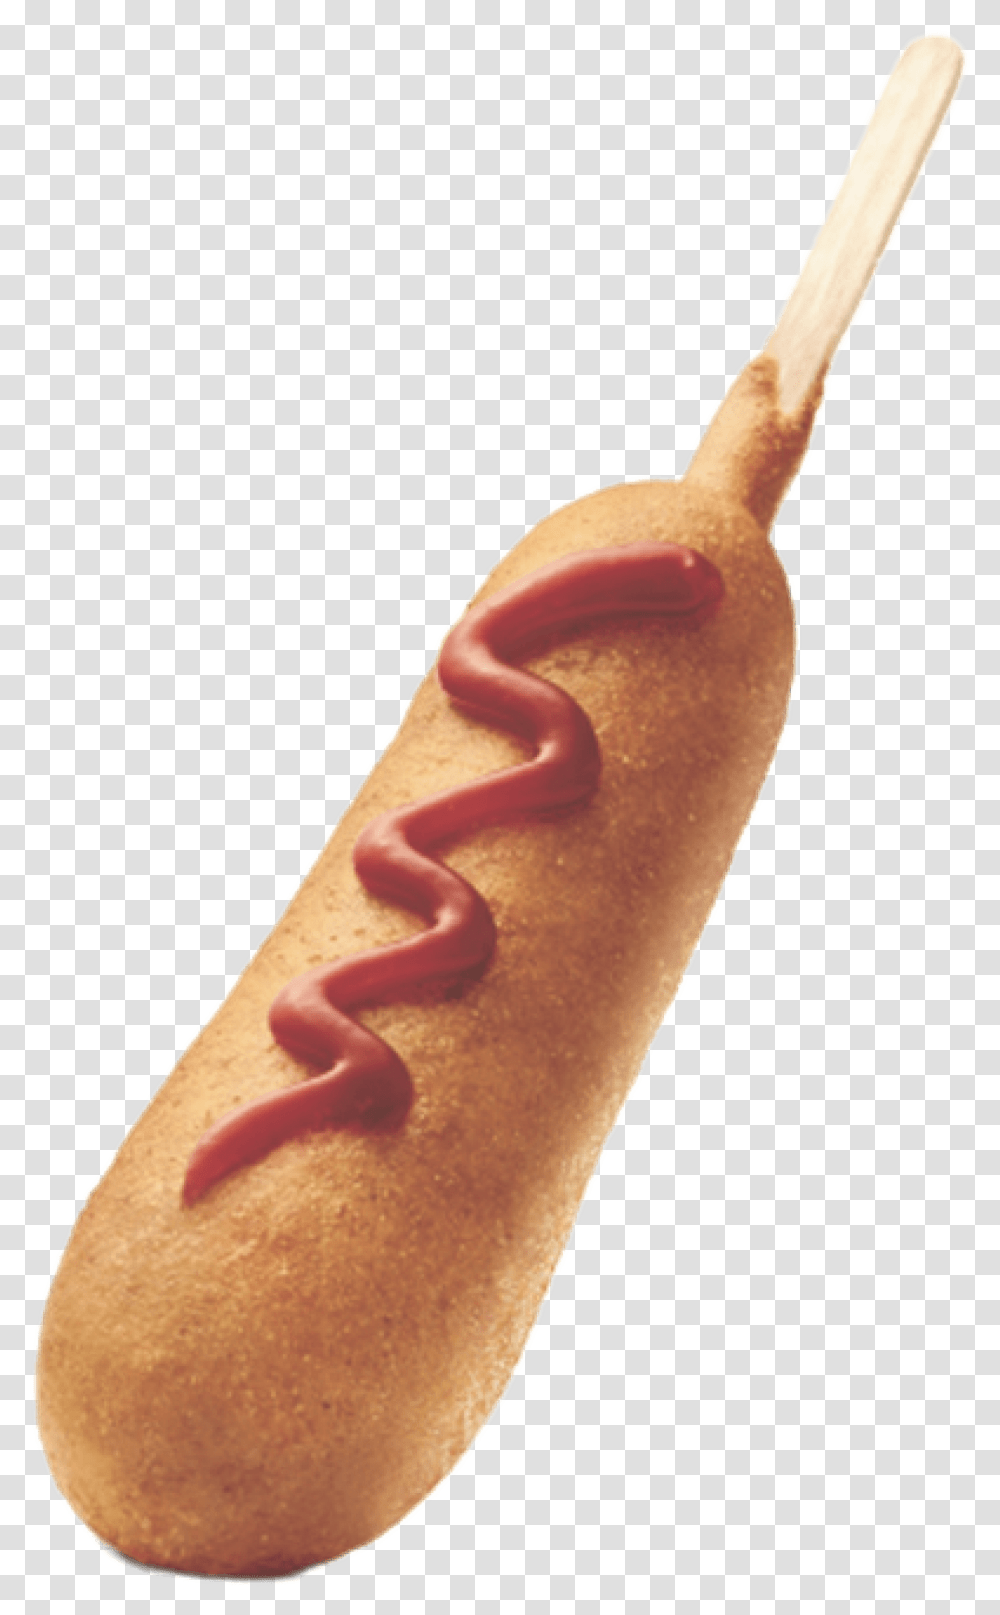 Corn Dog With Ketchup Clip Arts Corn Dog With Ketchup, Food, Sweets, Confectionery, Person Transparent Png